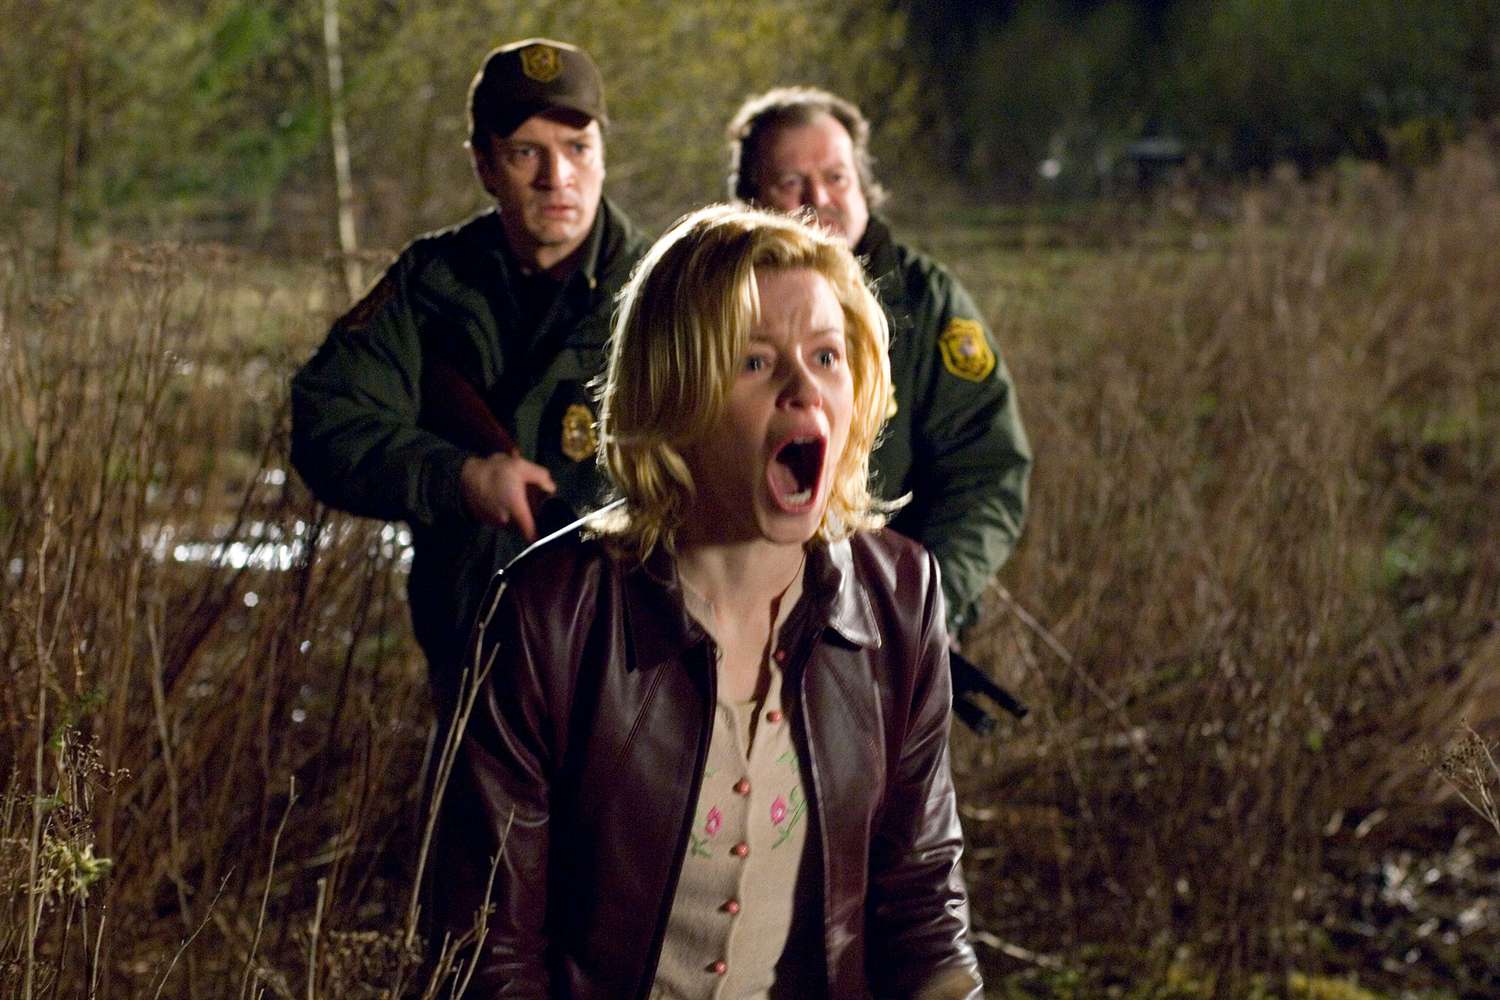 Slither (2006) (L to R) NATHAN FILLION, ELIZABETH BANKS and DON THOMPSON